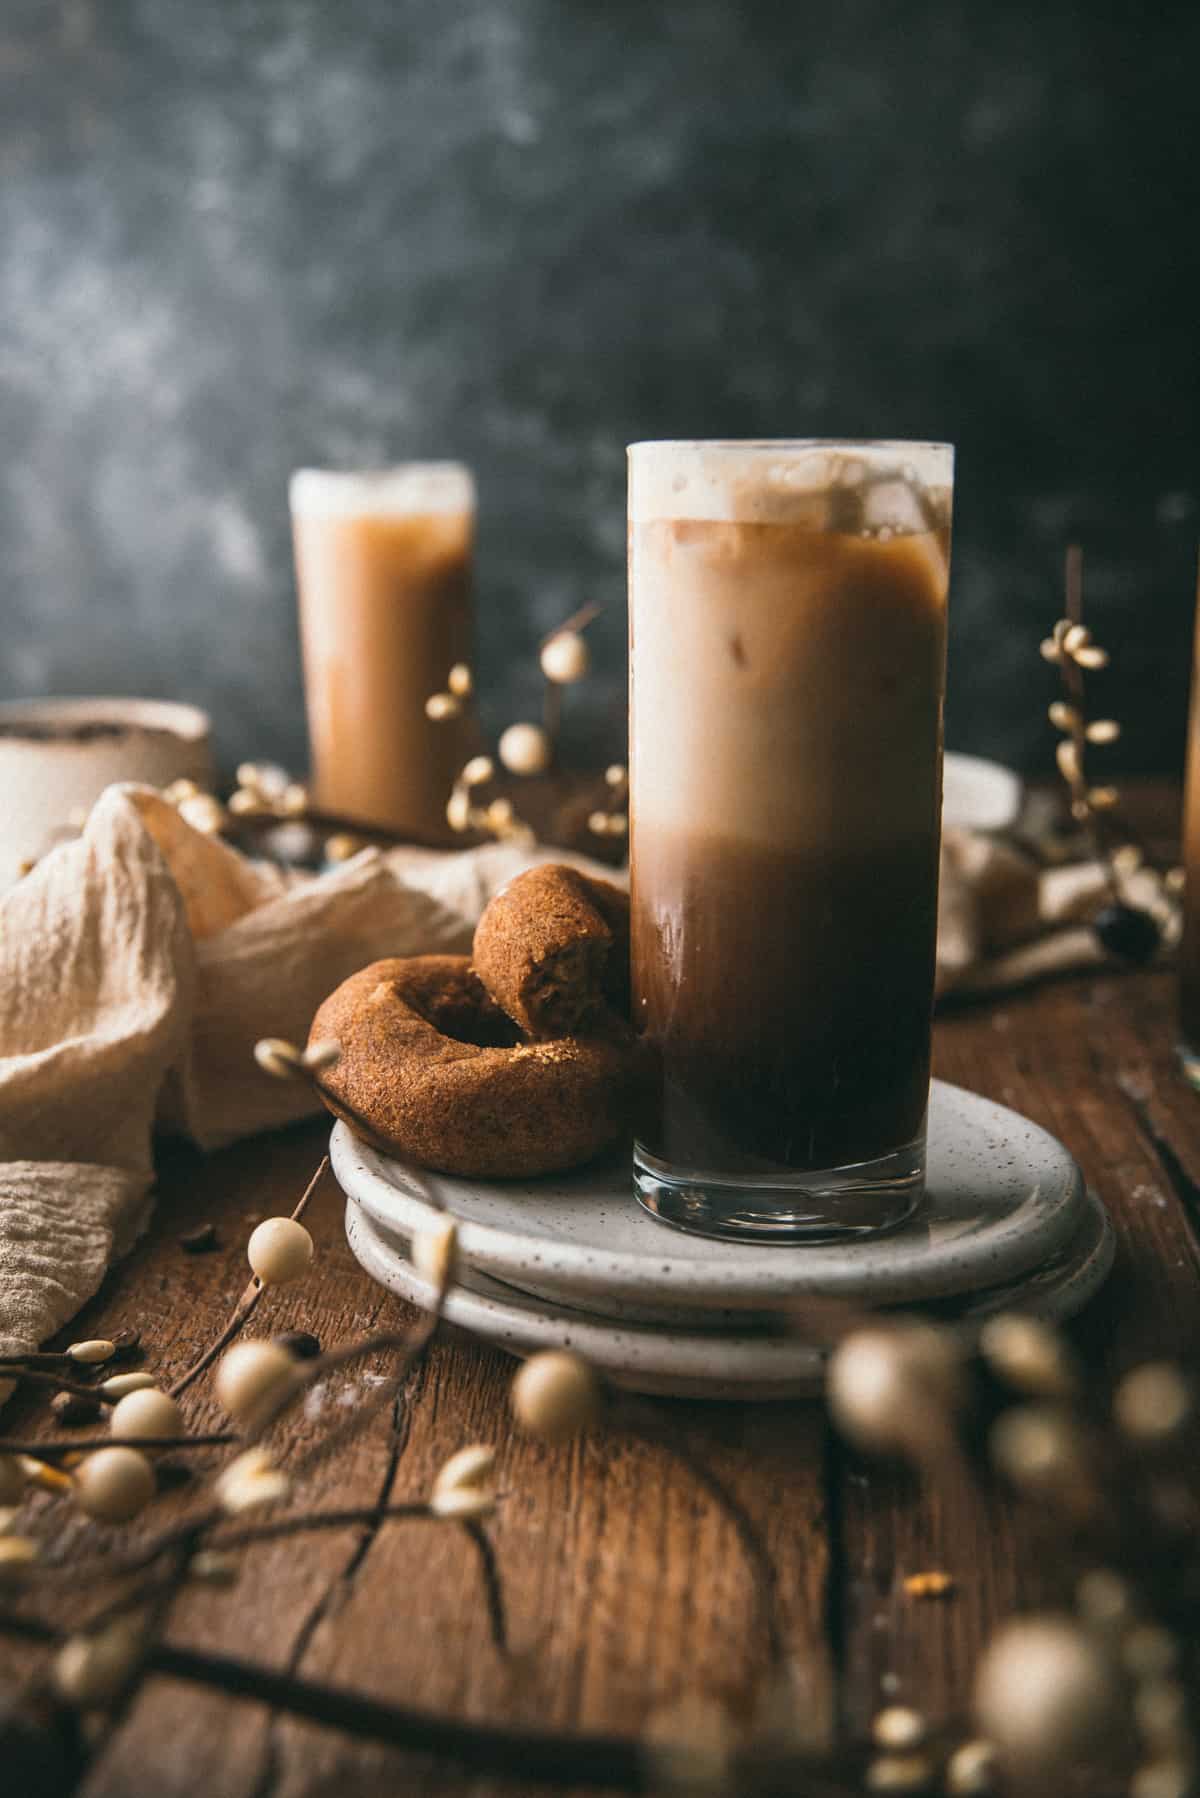 Layers of shaken espresso, ice, and milk in a glass on a plate with cider donuts